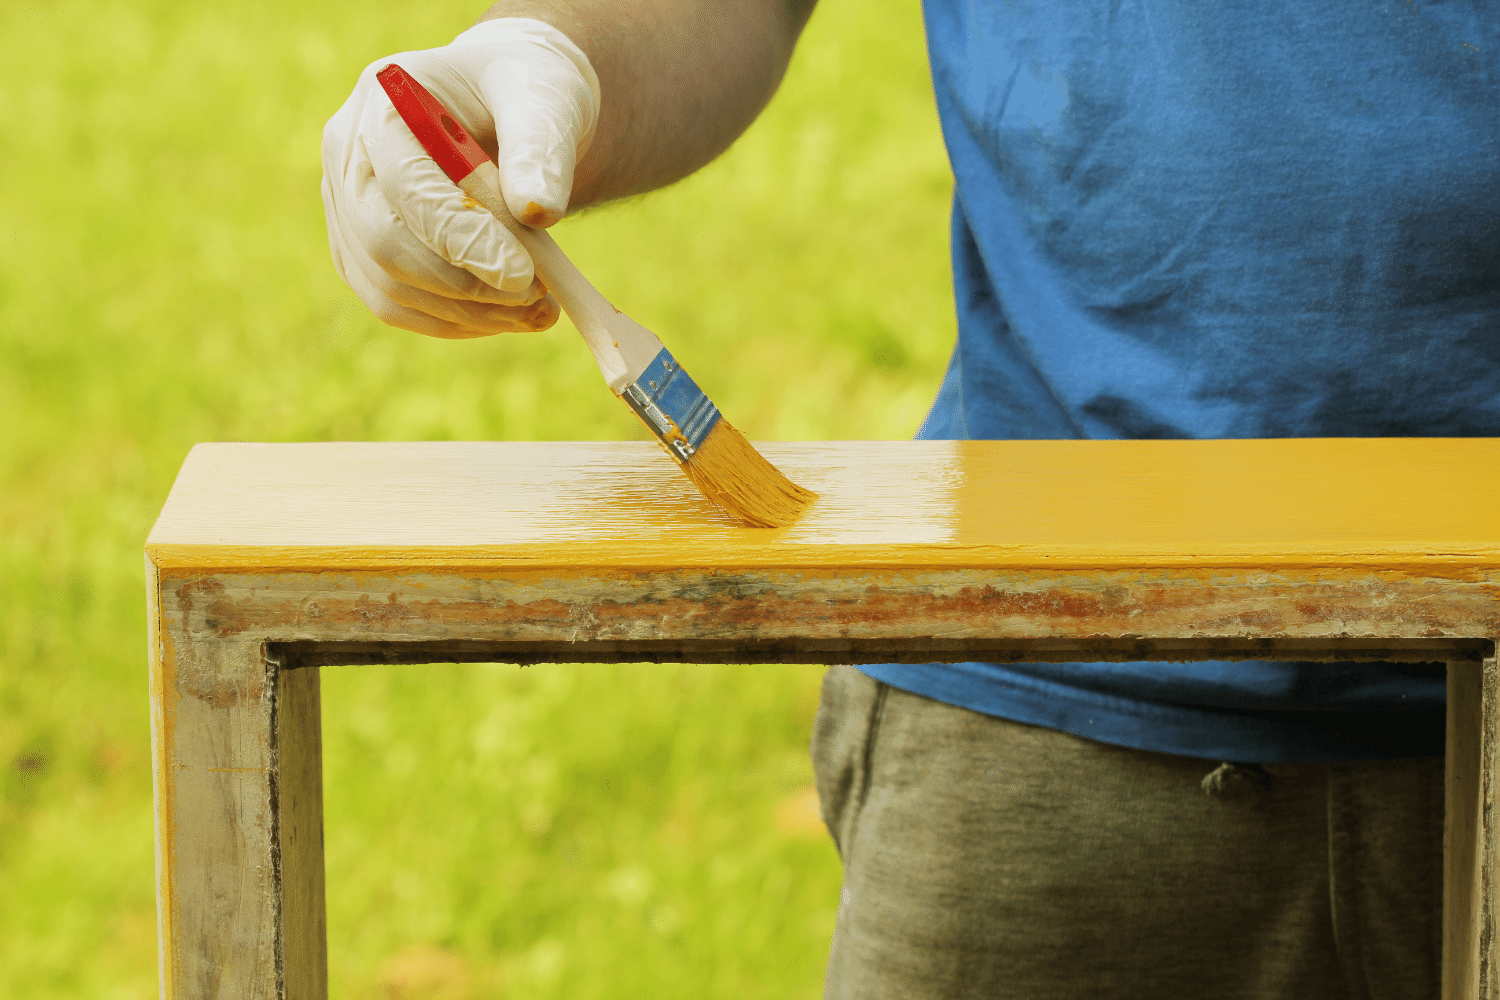 Tips for Painting Outdoor Furniture